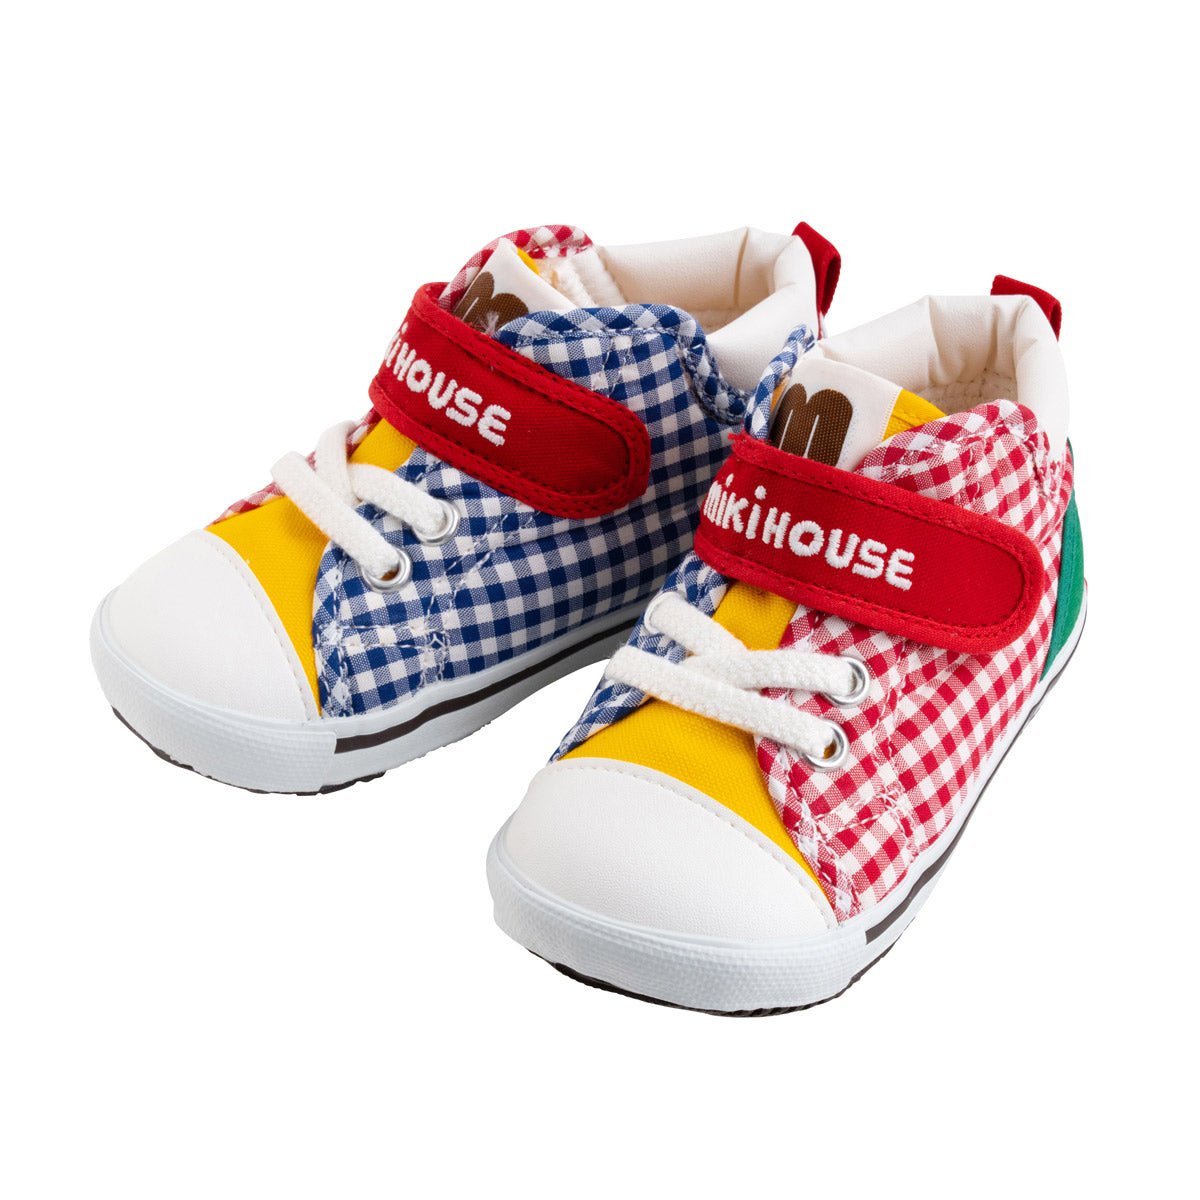 High Top Second Shoes - Patchwork Gingham